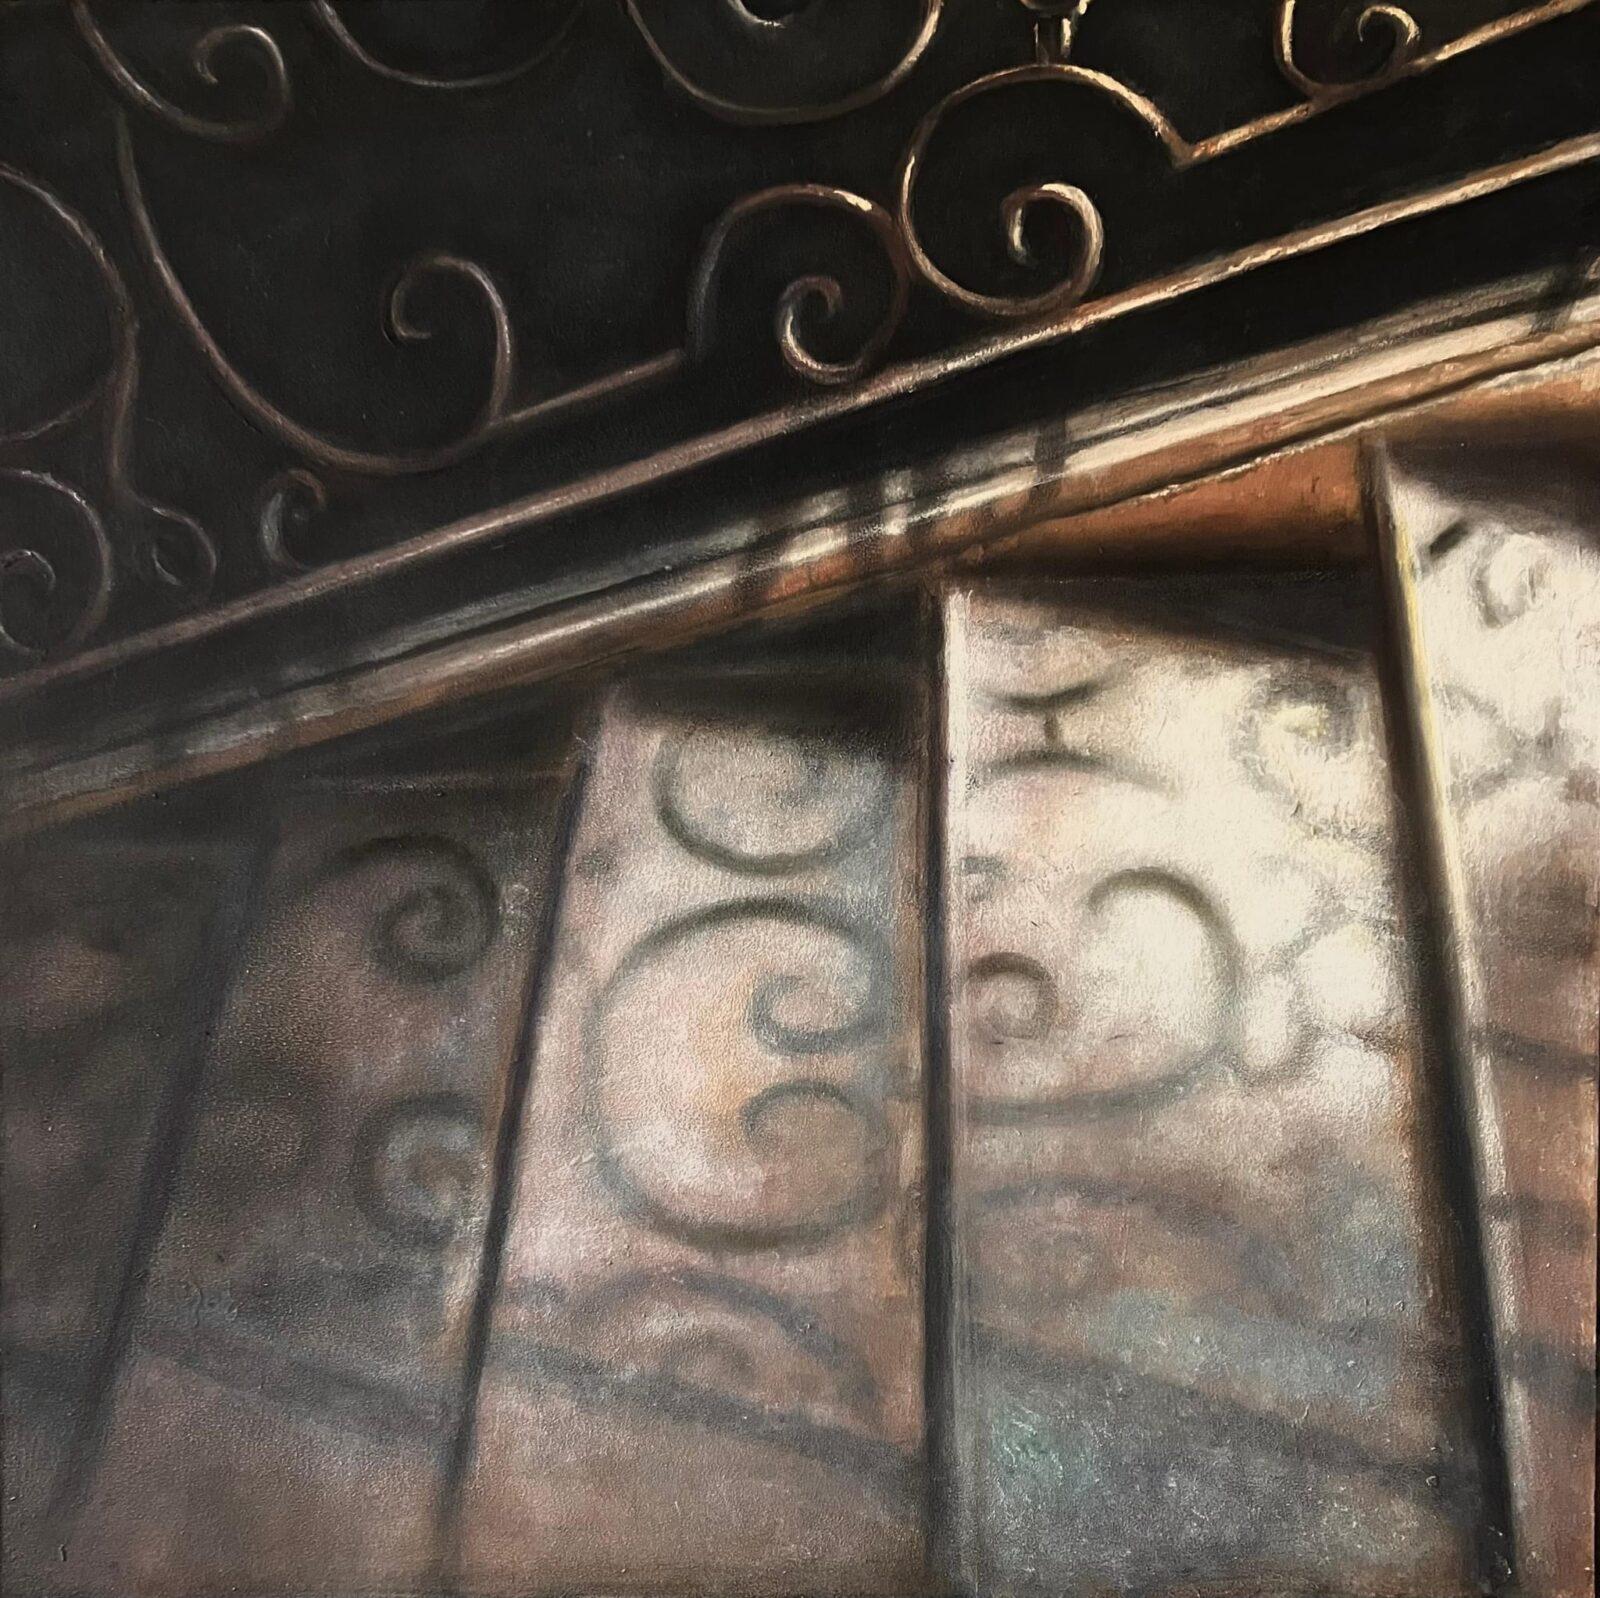 Stairs, oil on panel, 50x50cm